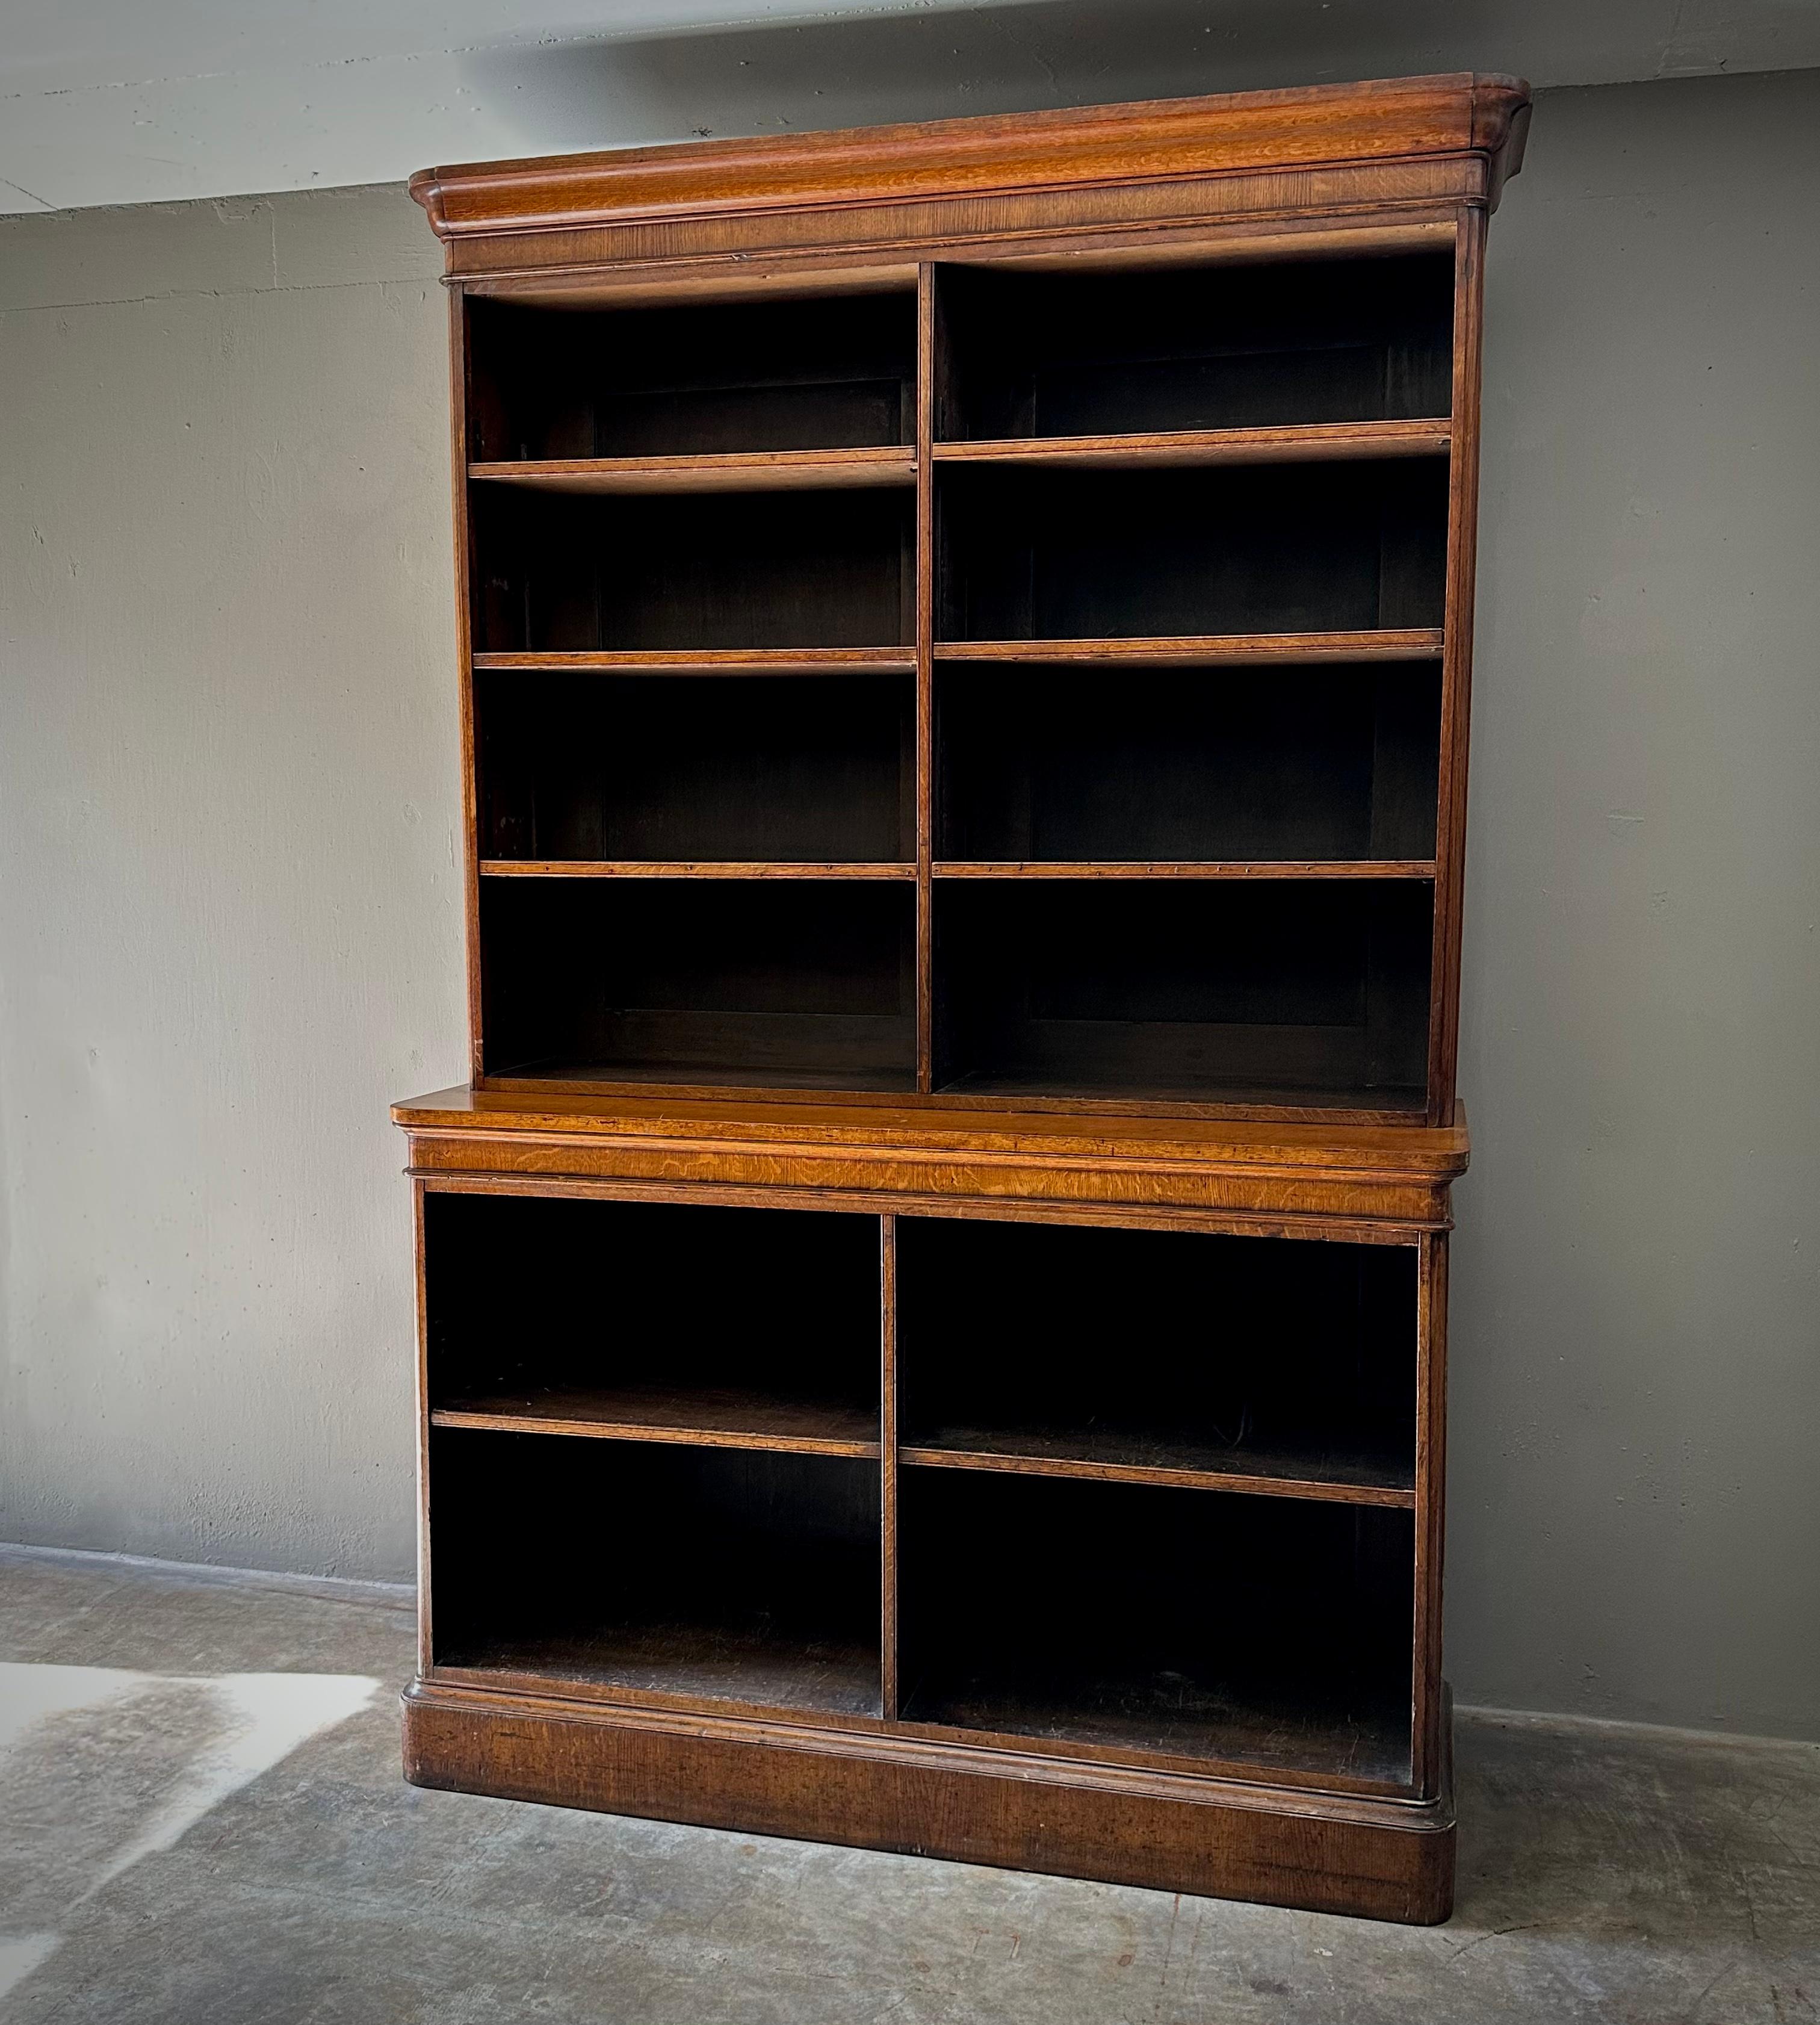 Display bookcase in a nicely aged brown mahogany wood with adjustable shelves. The piece is built in in two parts, and includes an extending shelf surface. The adjustable shelves create ample opportunity for unique display arrangements. 

England,